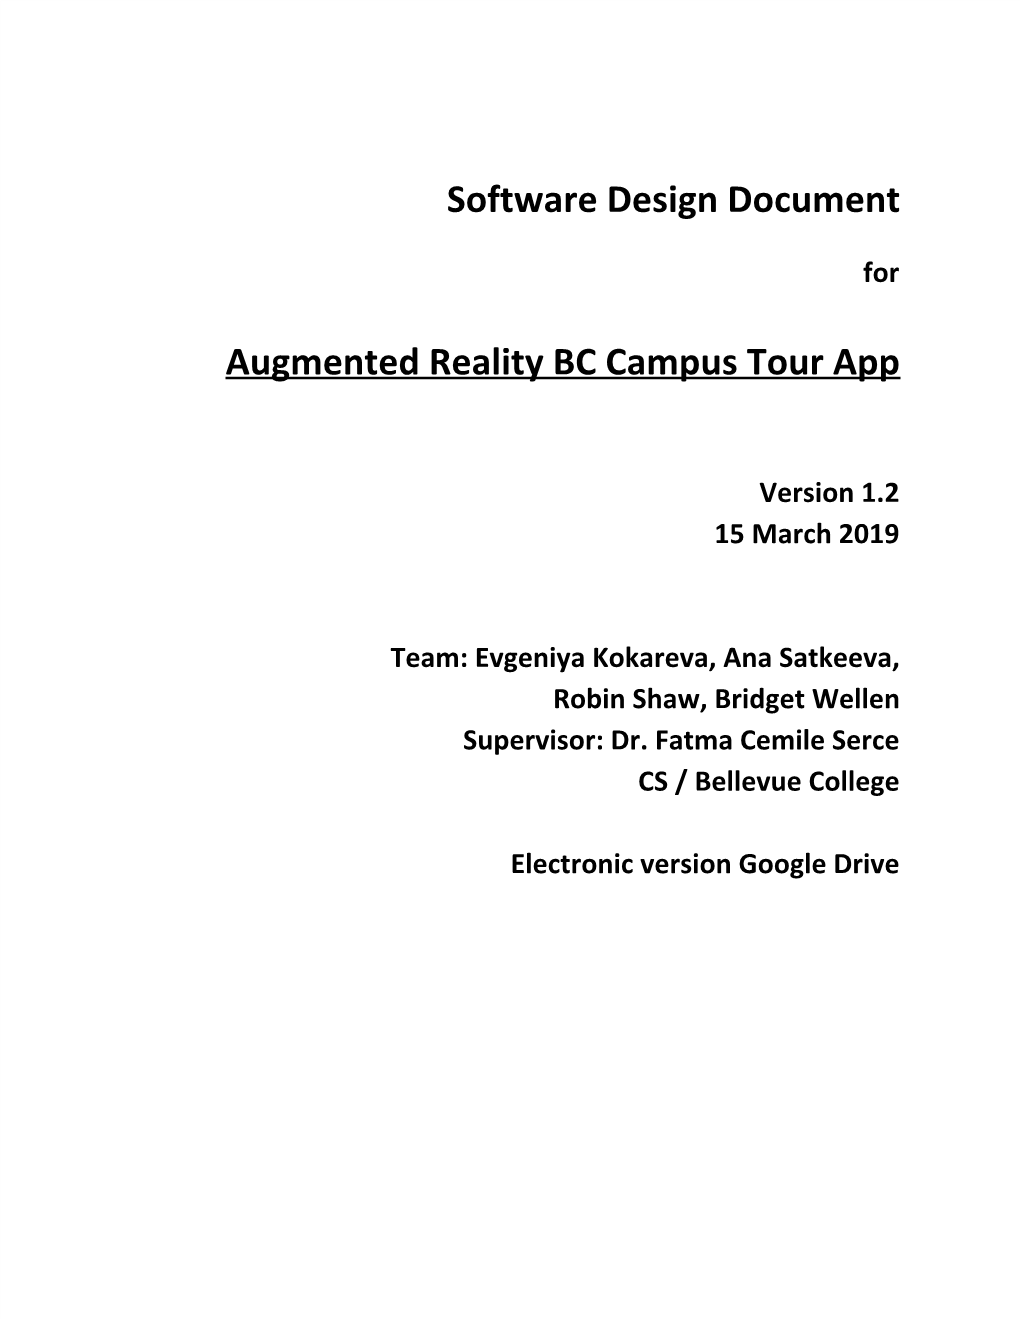 Augmented Reality BC Campus Tour App